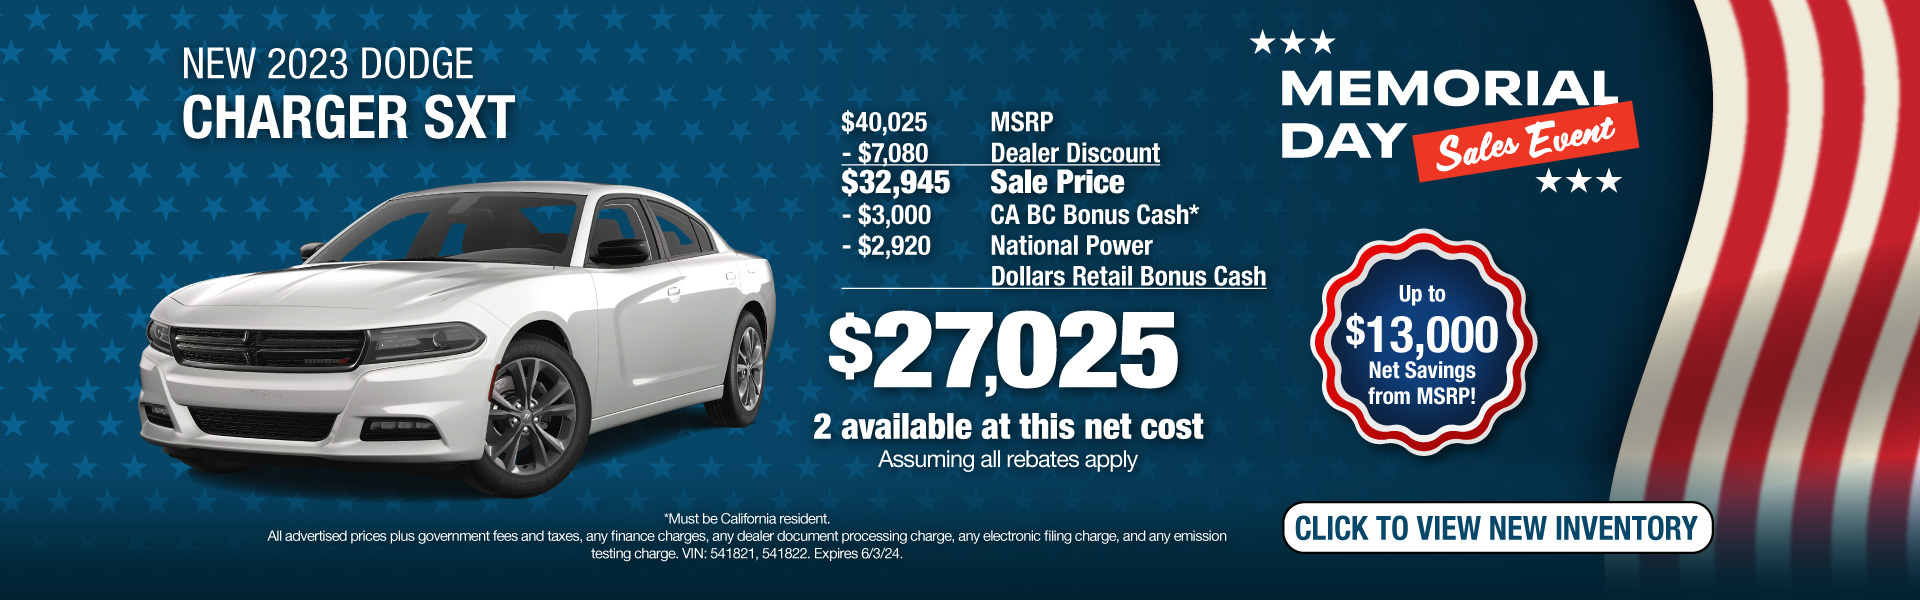 Get a New 2023 Dodge Charger SXT for $27,025 Net Cost. Expires 6/3/24.